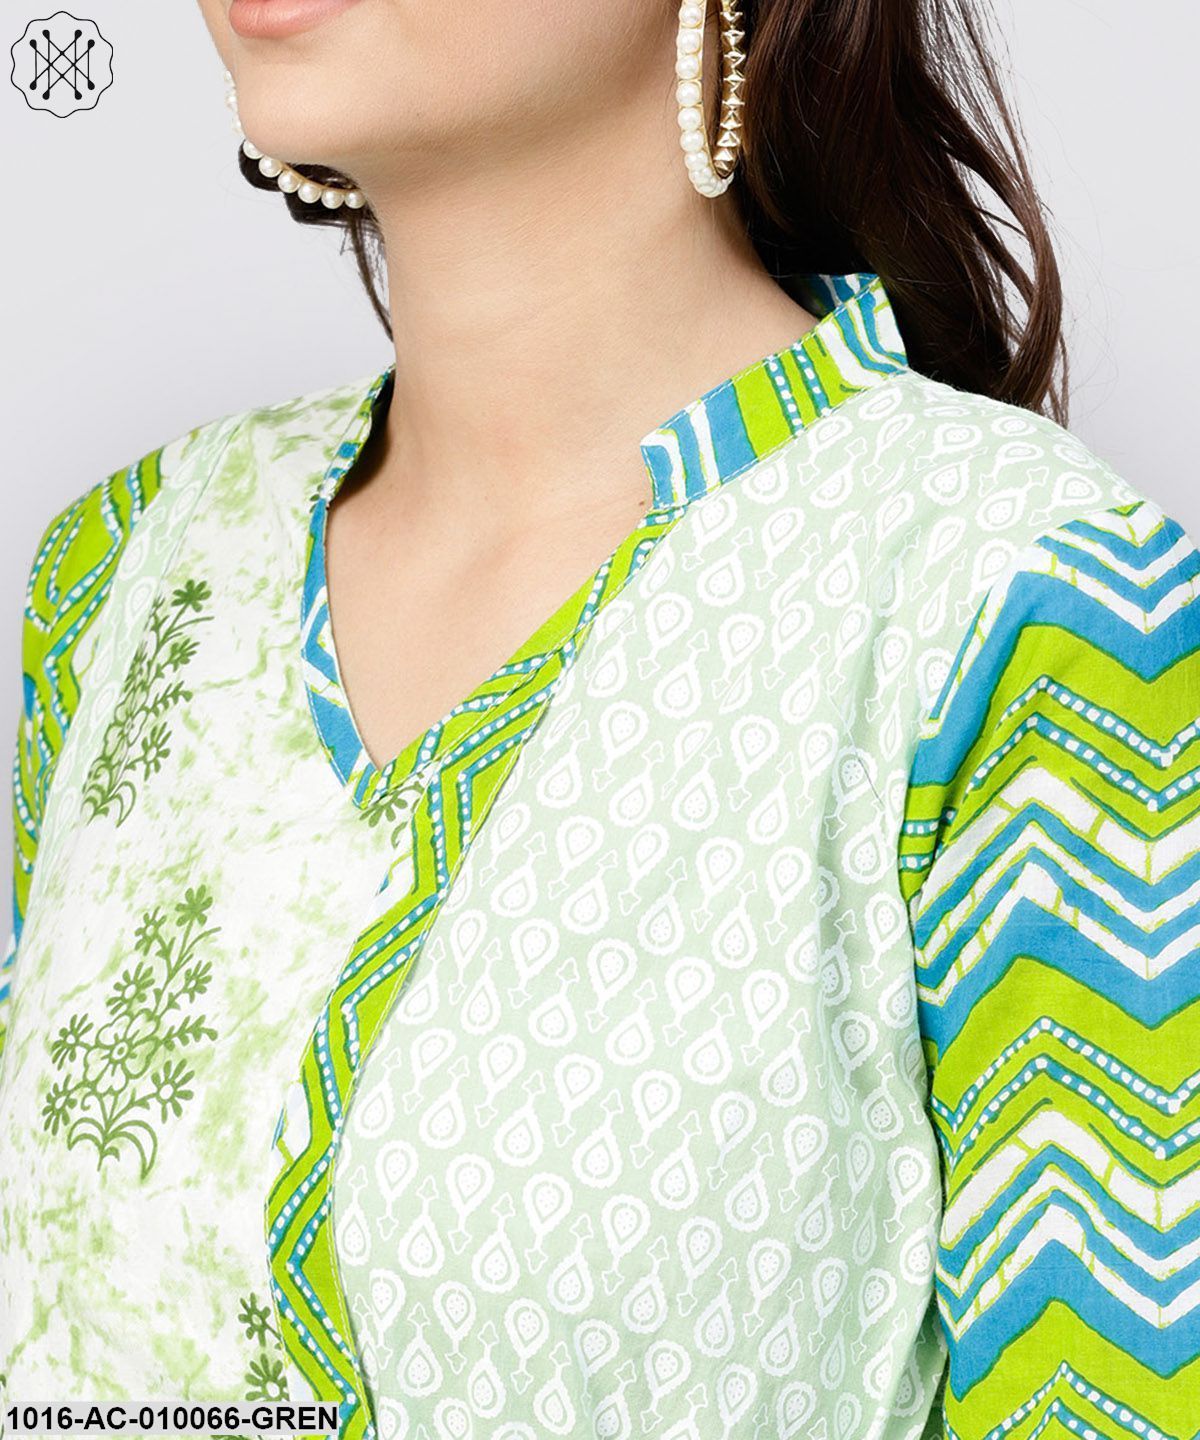 Green Printed Cotton Angrakha Style Dress WithMadarin Collar Emblished With Tassels